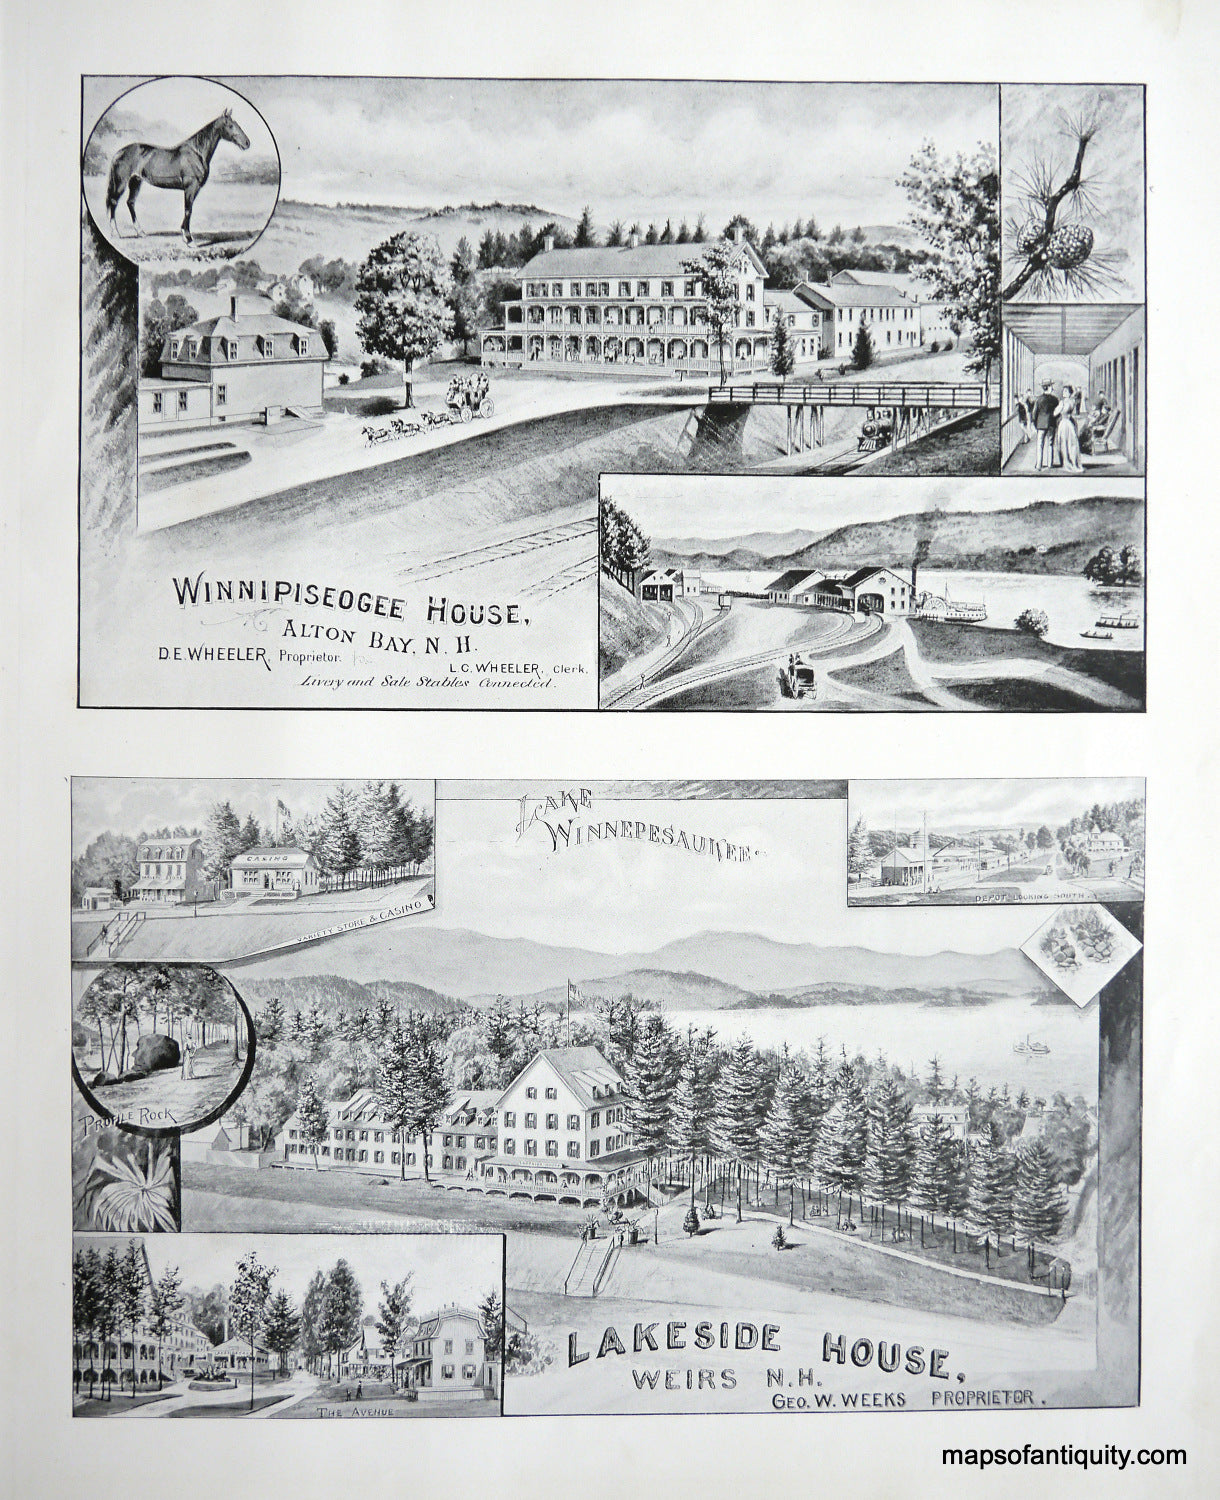 Antique-Illustration-Winnipiseogee-House-Alton-Bay-N.H.-Lakeside-House-Weirs-N.H.-New-Hampshire--1892-Hurd-Maps-Of-Antiquity